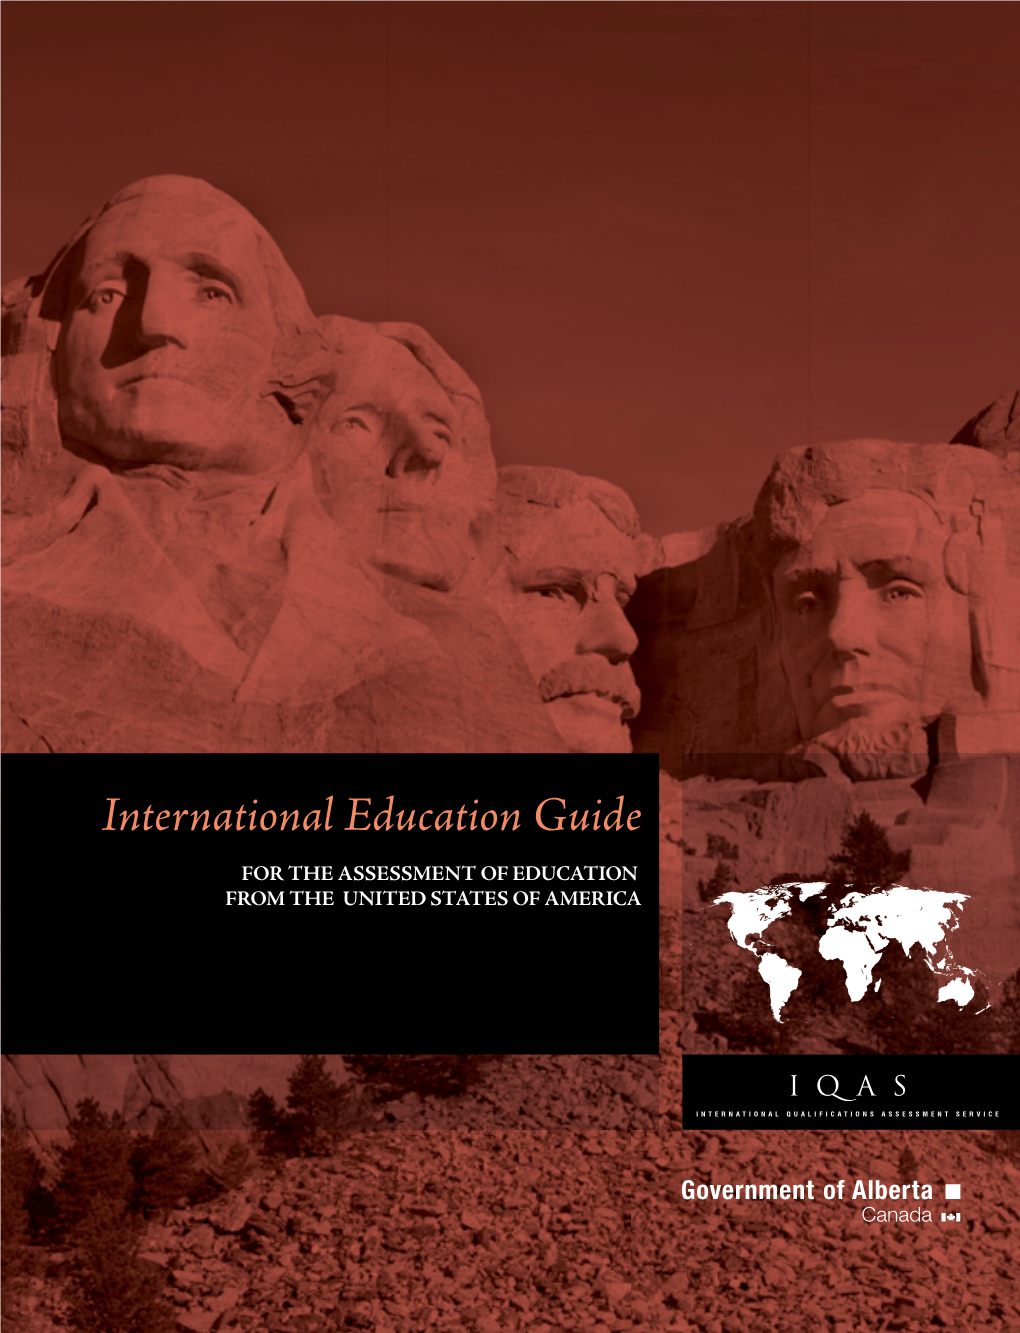 International Education Guide for the Assessment of E of Assessment the for Duc a ST UNITED the from Tion